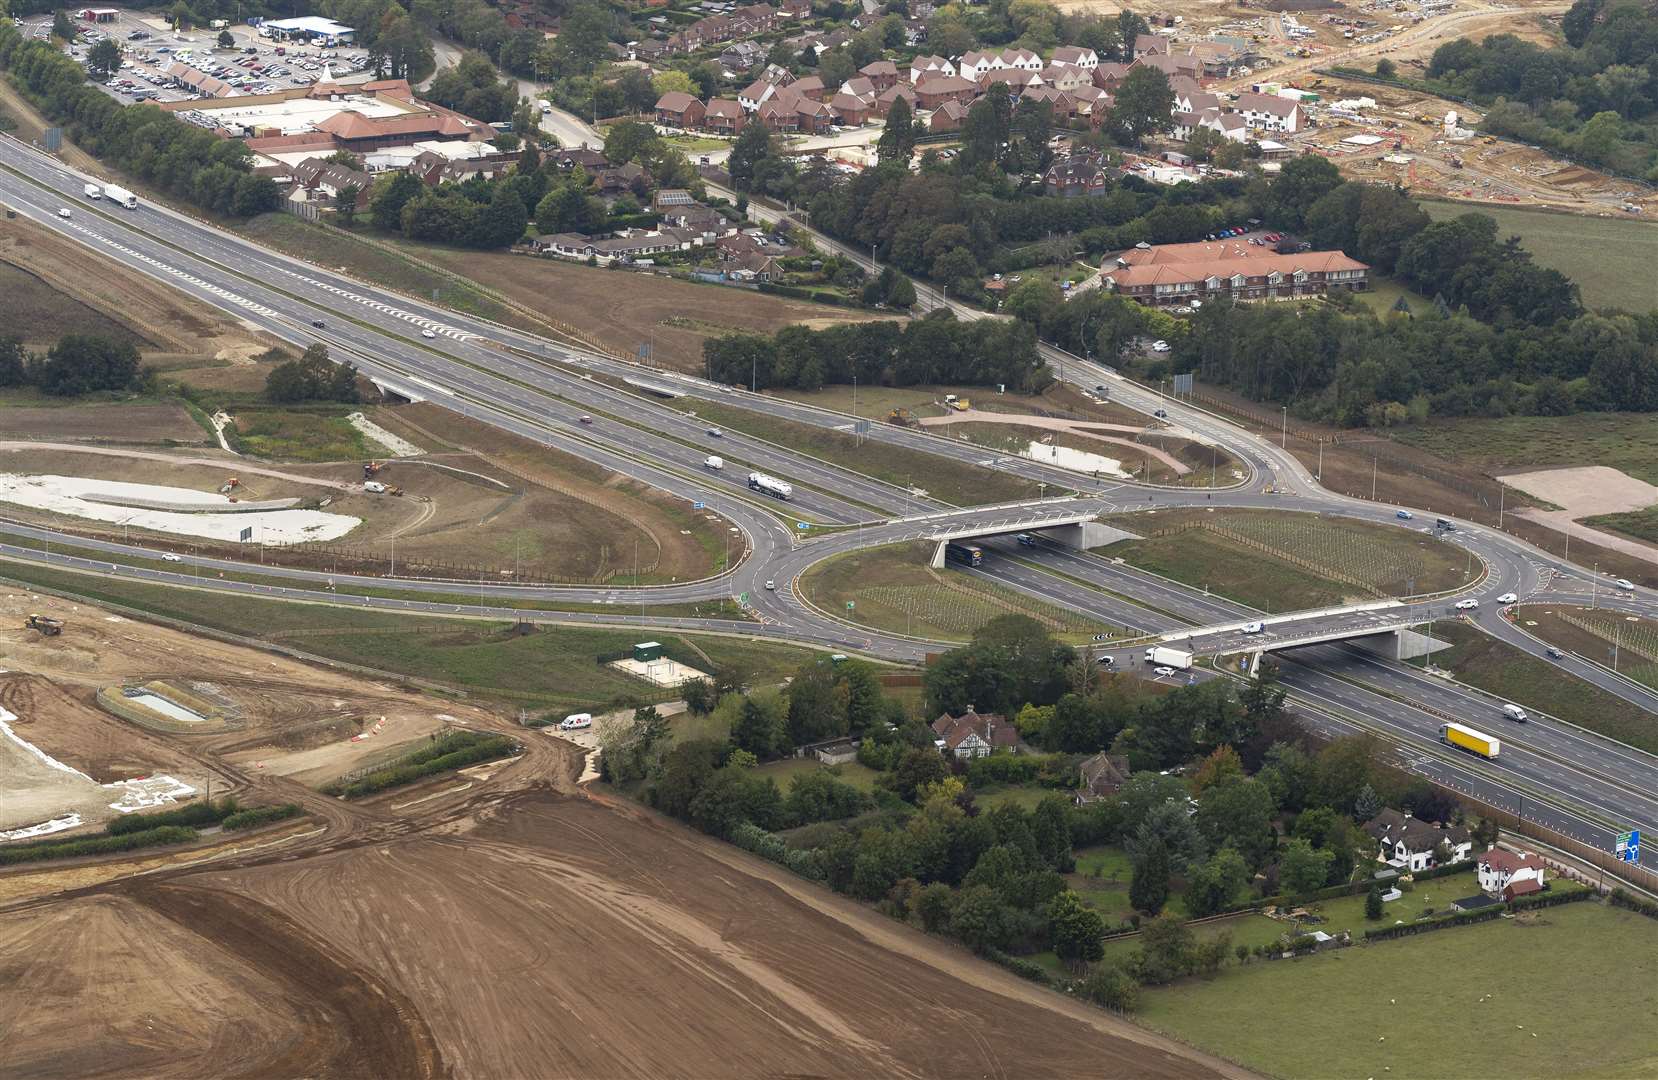 Junction 10a, pictured last year, has been built 700 metres south east of Junction 10 and is linked to the A2070 Bad Munstereifel Road via a new link road. Picture: Ady Kerry/Ashford Borough Council